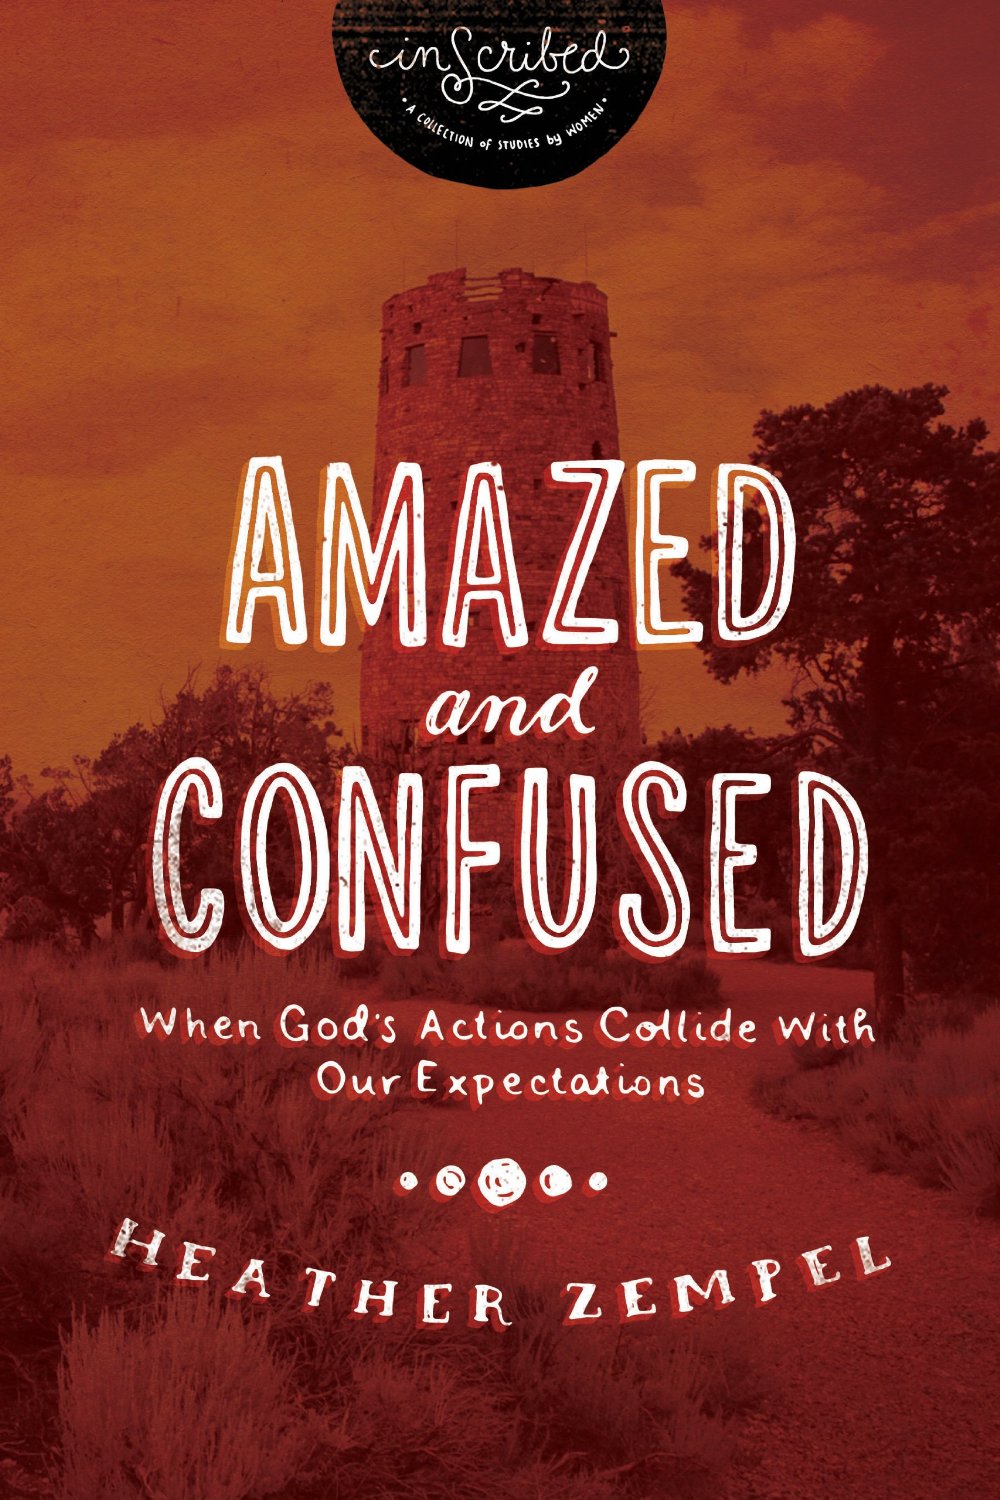 Book Review: Amazed and Confused by Heather Zempel